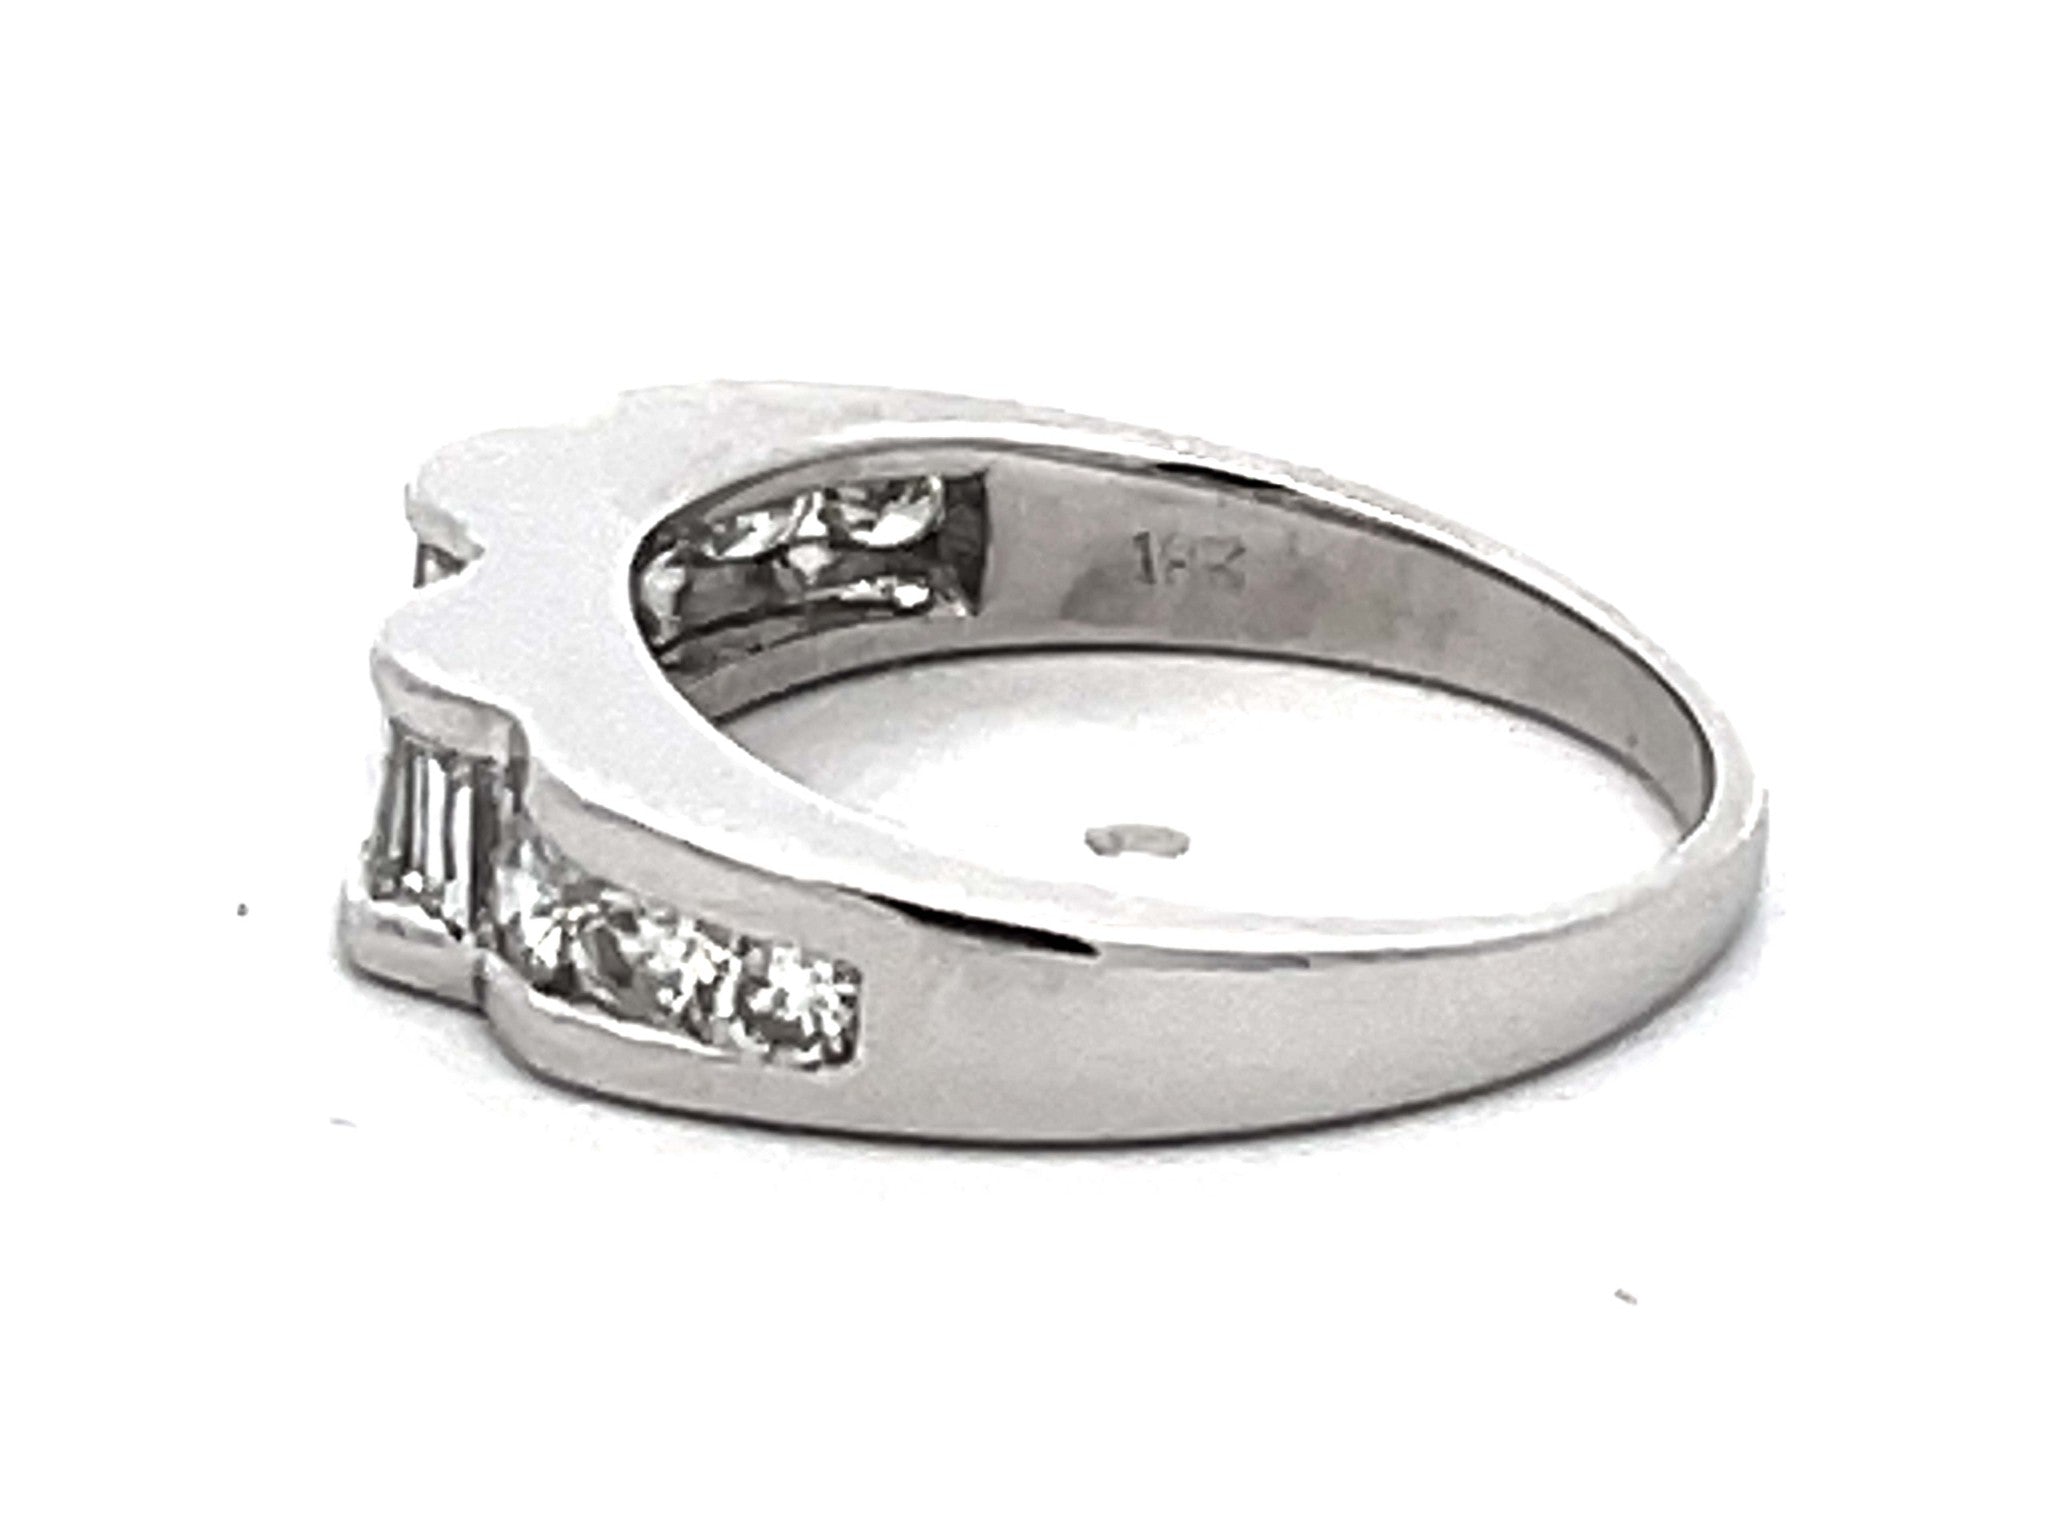 Baguette and Brilliant Diamond Band Ring 18k White Gold